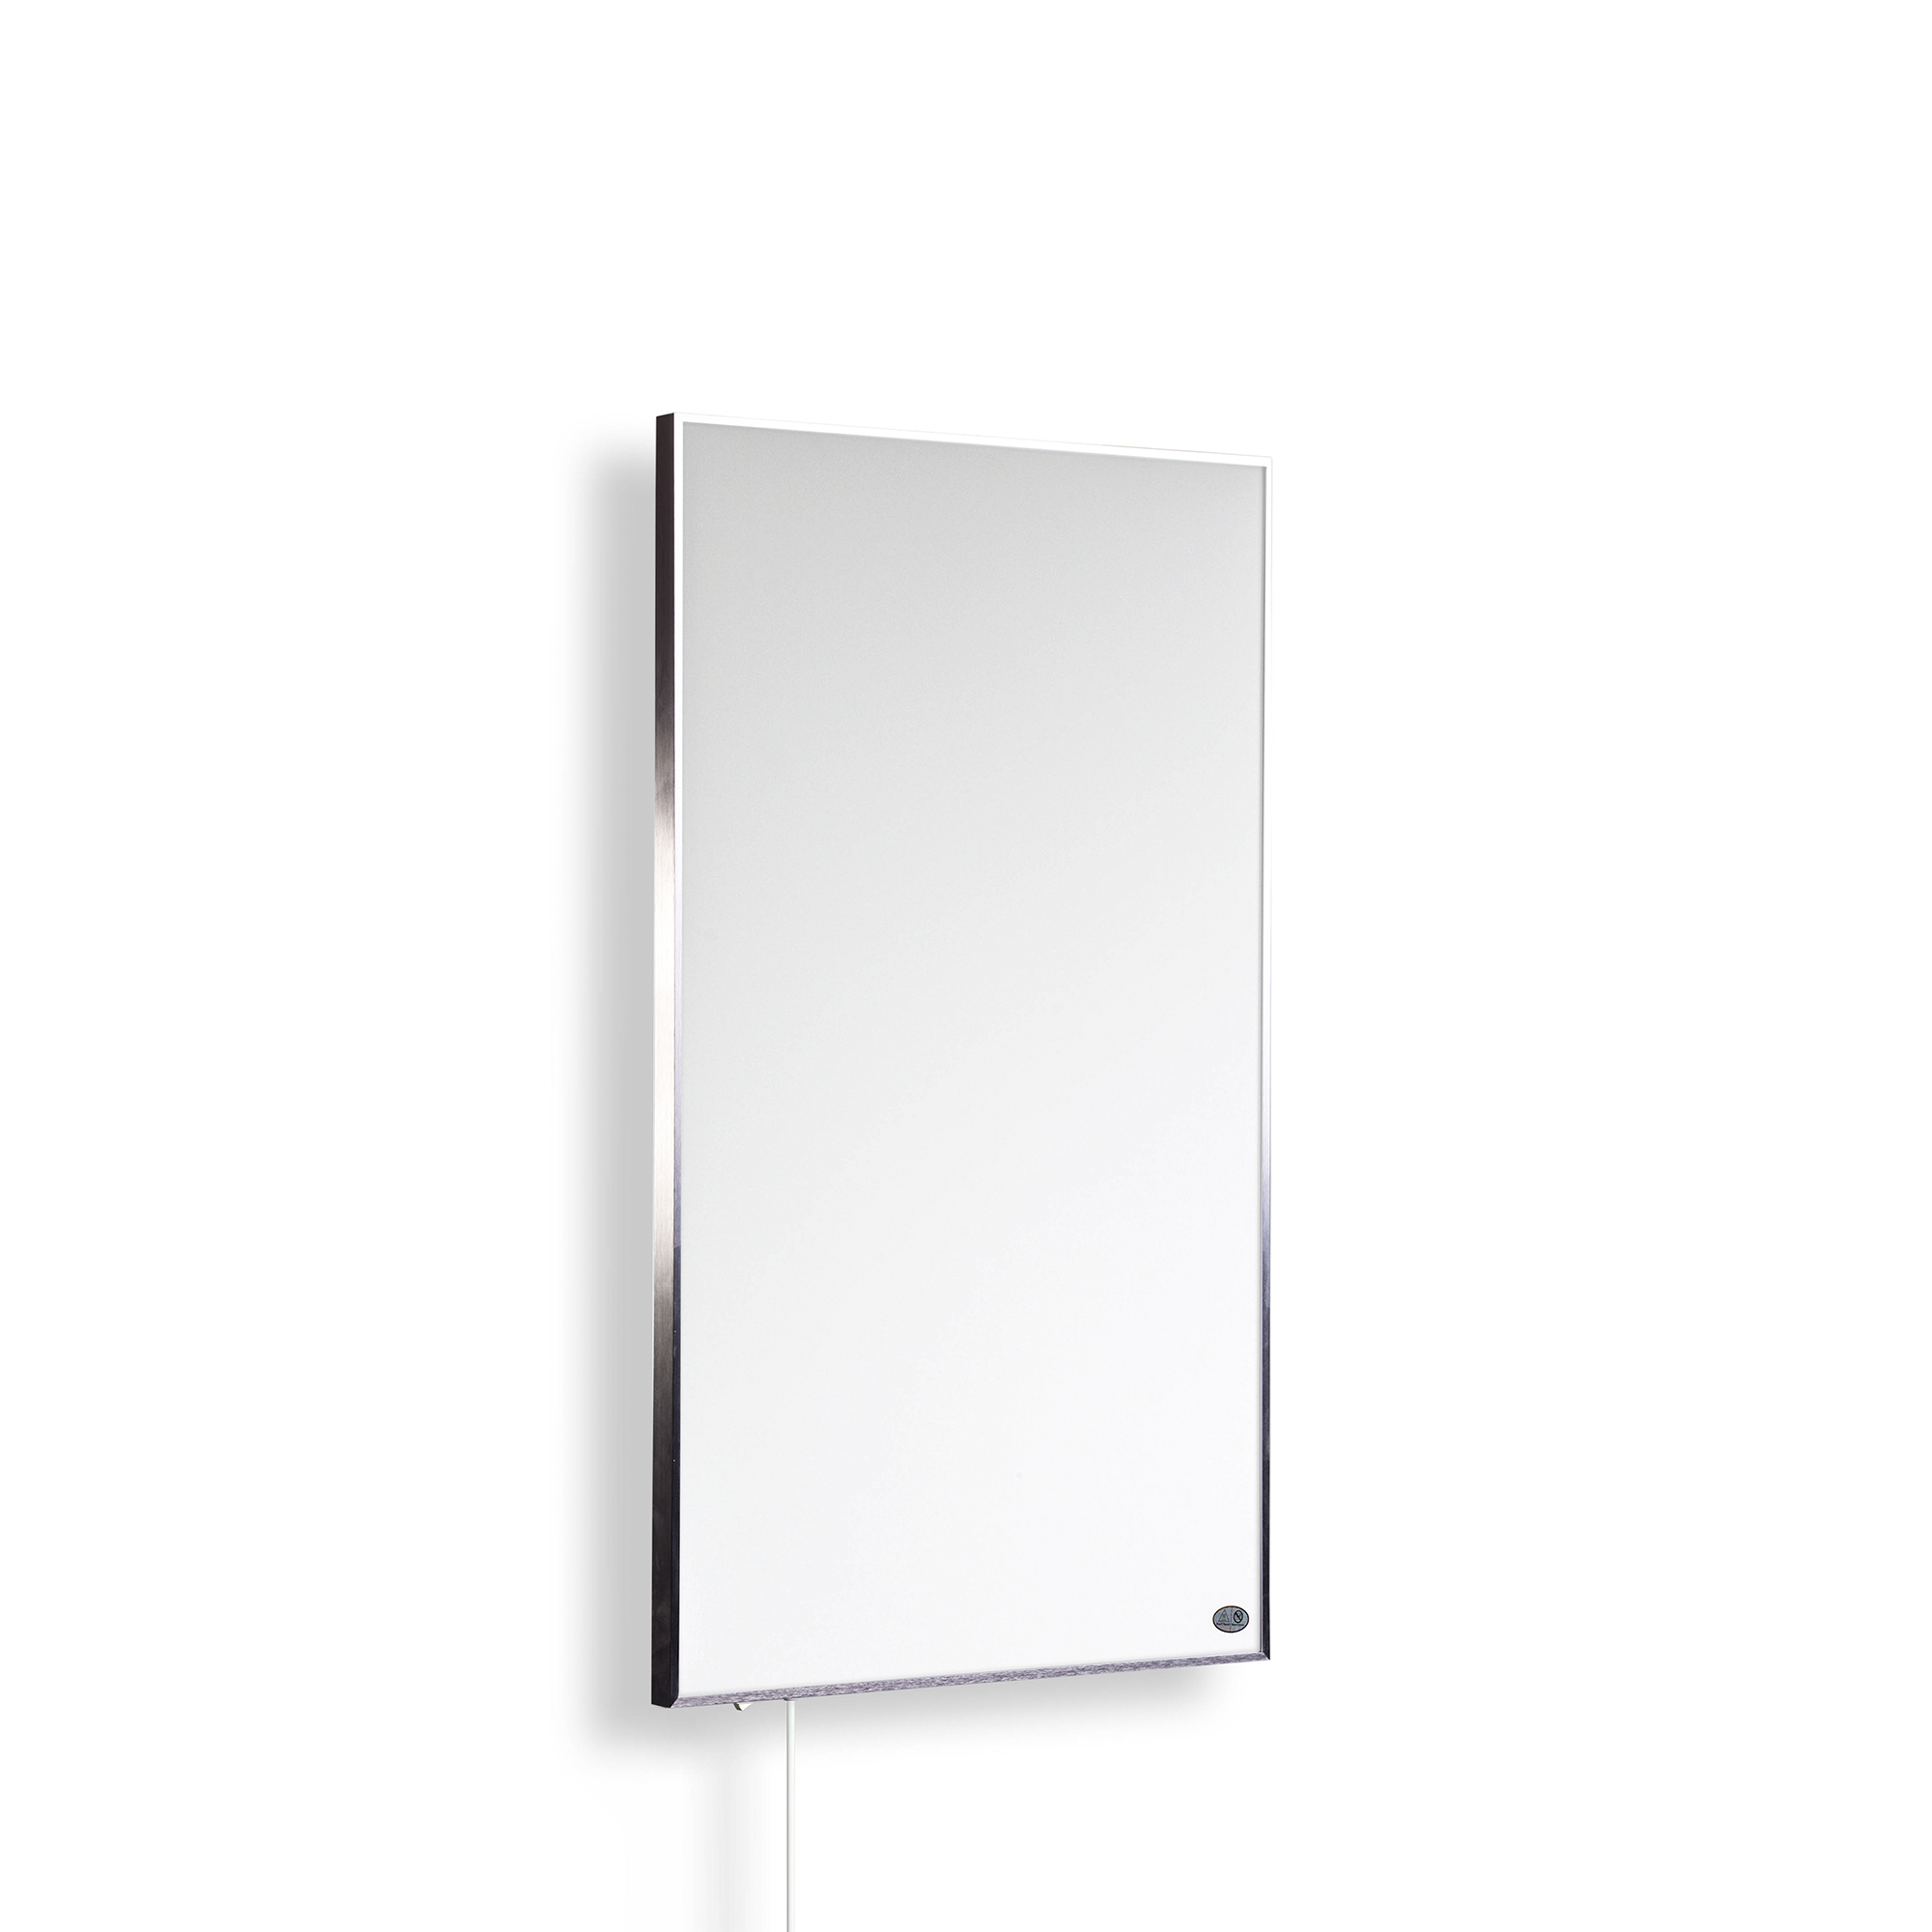 Infrarotheizung 'E-Serie' silbern 1200 W + product picture